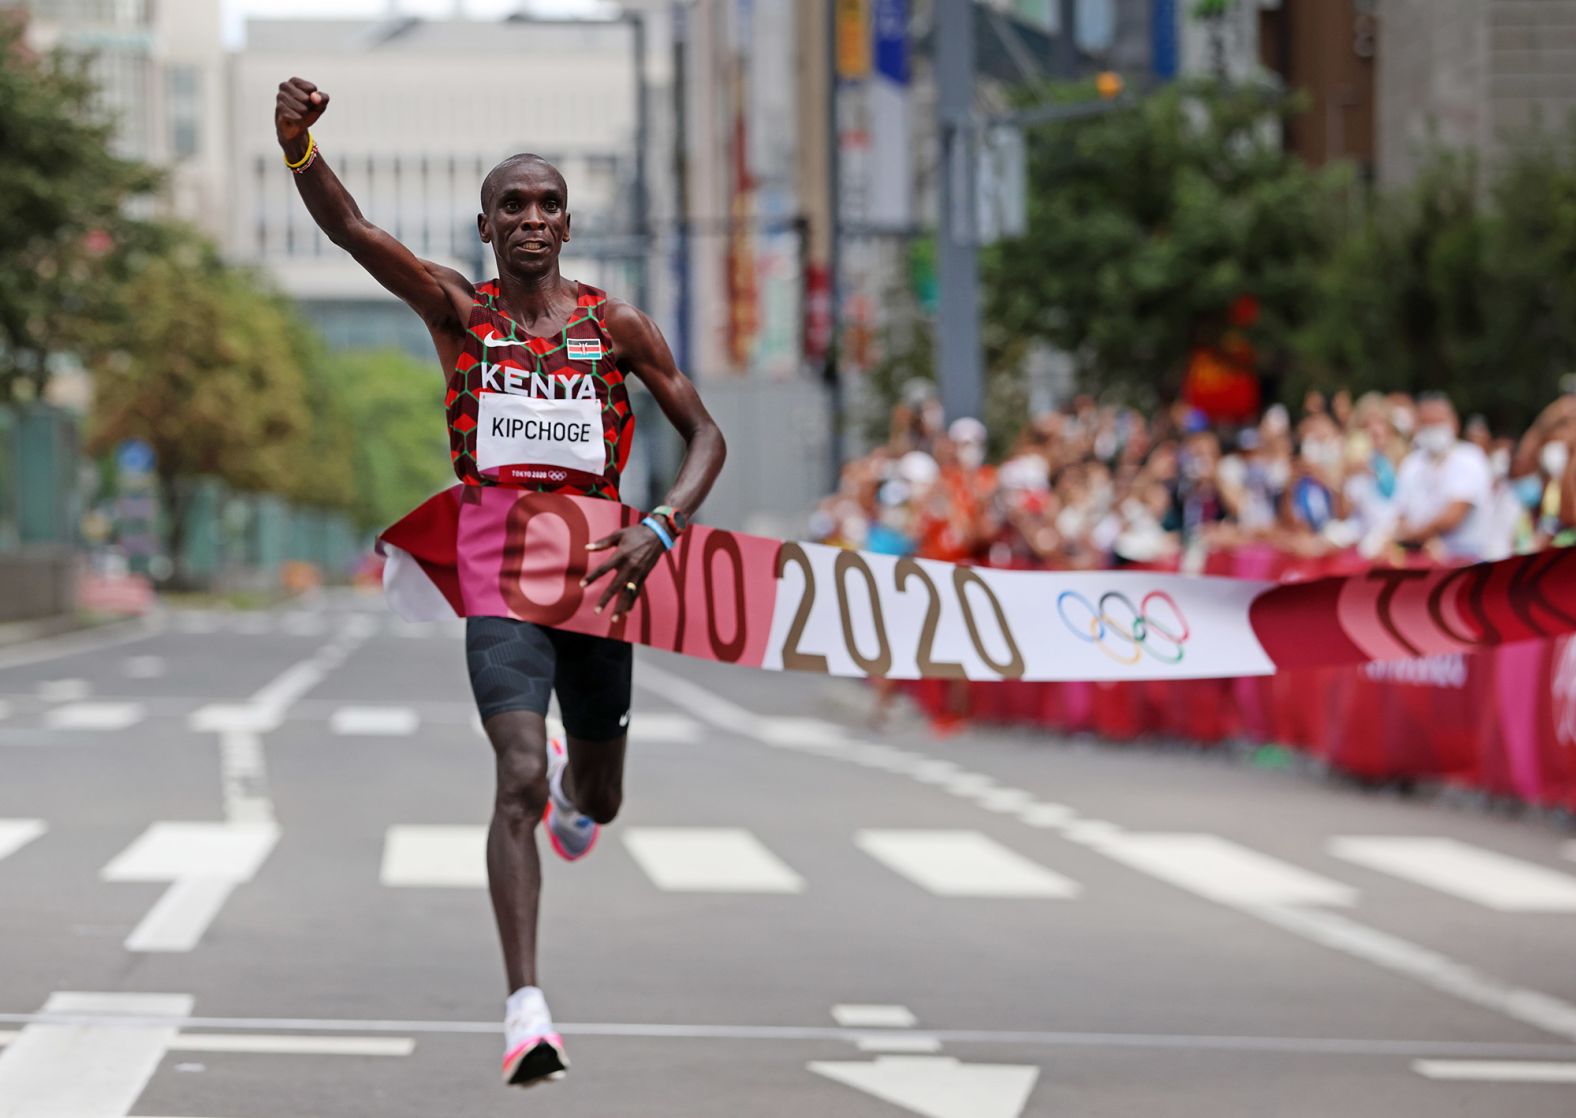 Kenya's Eliud Kipchoge crosses the finish line August 8 <a href="index.php?page=&url=https%3A%2F%2Fwww.cnn.com%2Fworld%2Flive-news%2Ftokyo-2020-olympics-08-07-21-spt%2Fh_af4bb17527e168632036b0fa6e6d54a5" target="_blank">to win the marathon</a> for the second Olympics in a row. Kipchoge, the world-record holder in the event, finished with a time of 2:08:38.